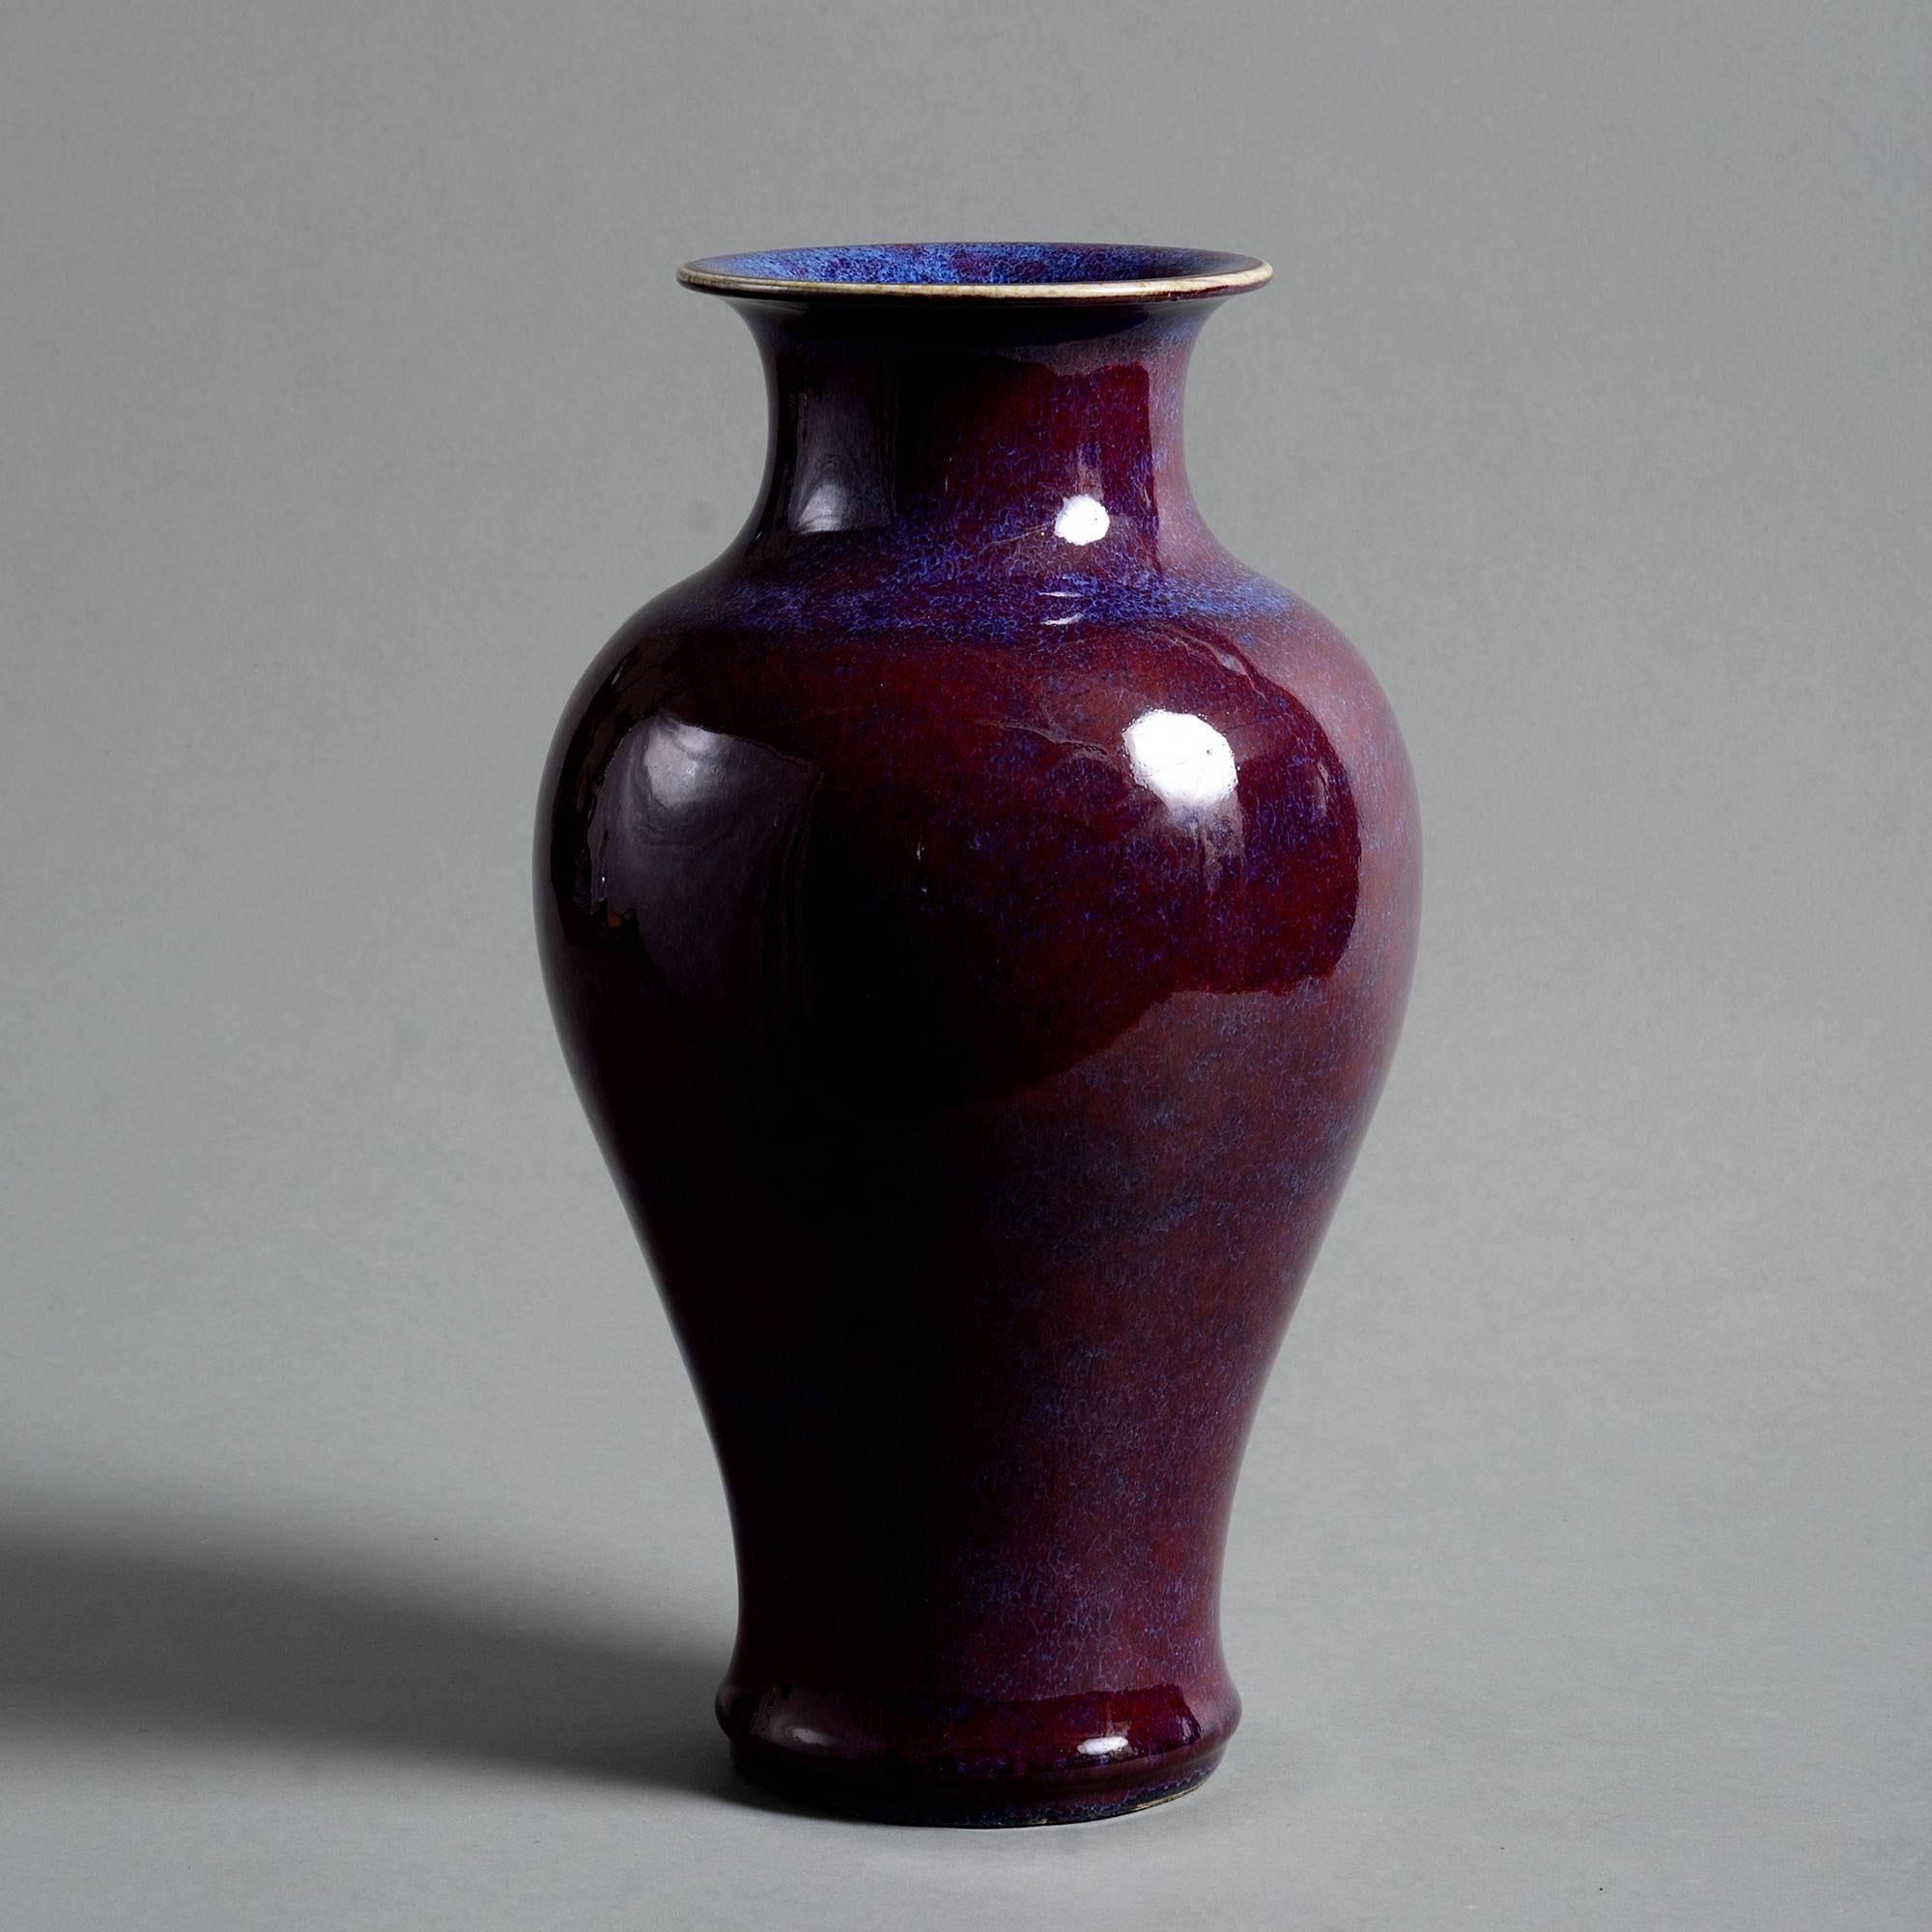 A 19th century flambé vase of baluster form, with deep purple sang de boeuf glazes. 

Qing Dynasty, Tongzhi Period.